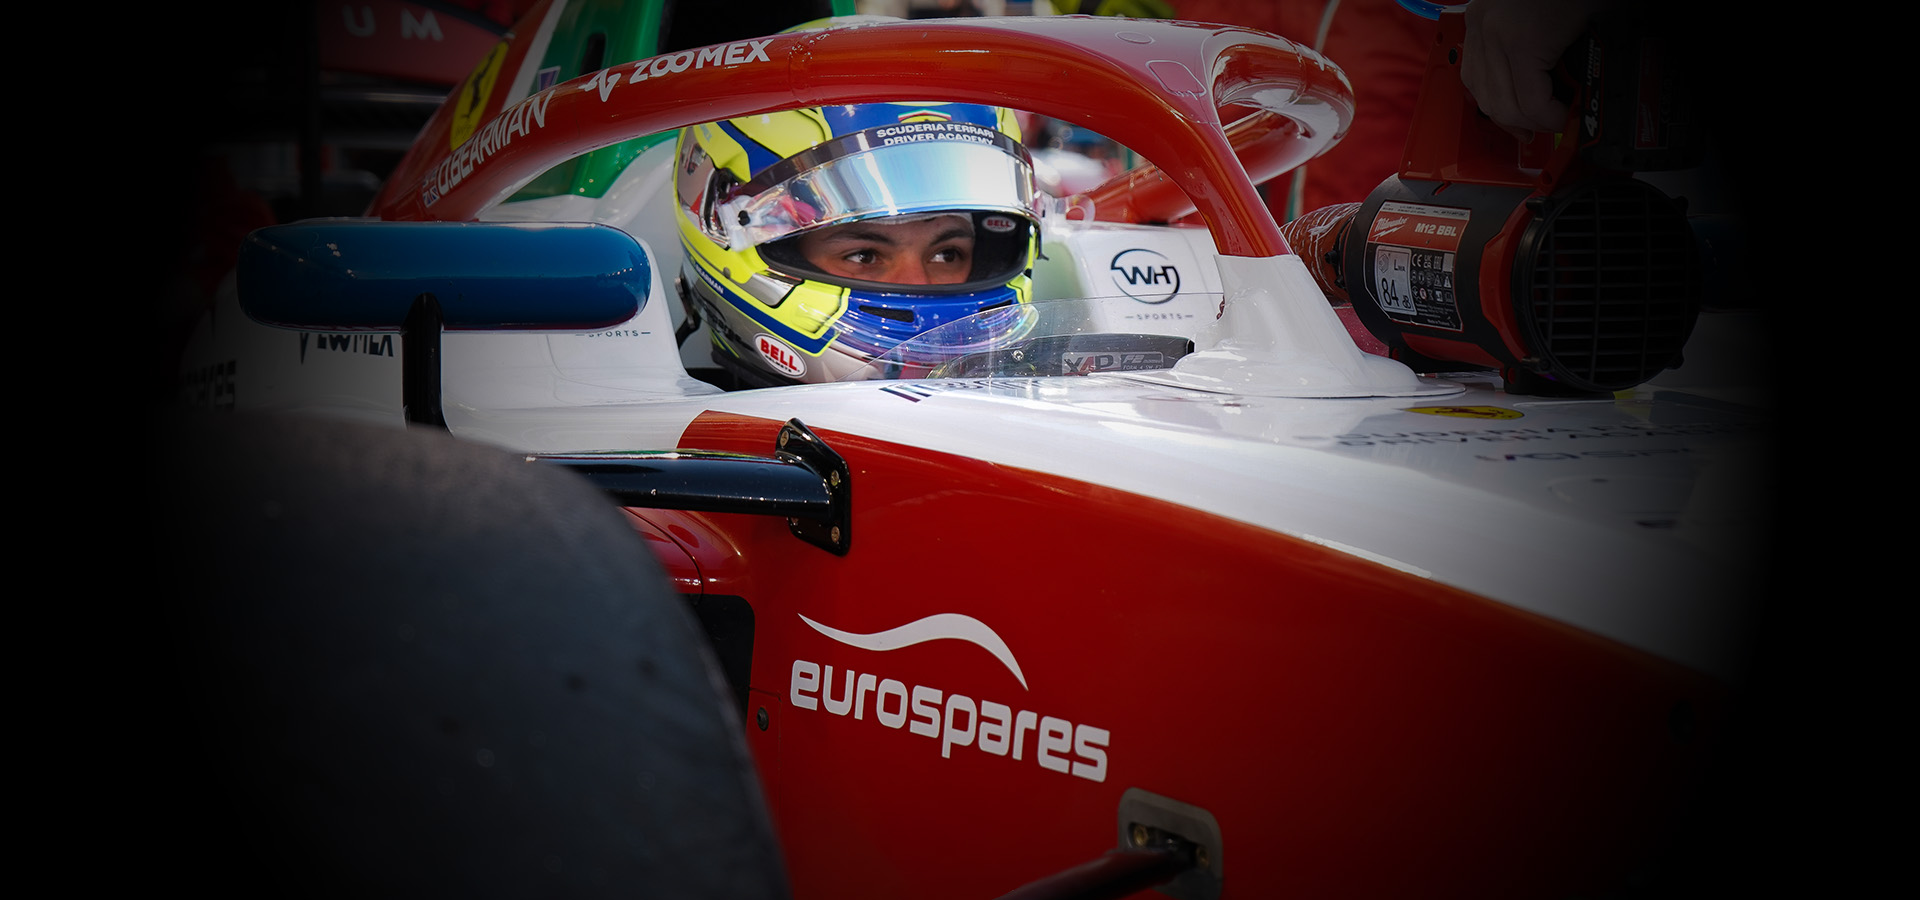 Oliver Bearman sitting in his Formula 2 racing car which has Eurospares logo on the side. 